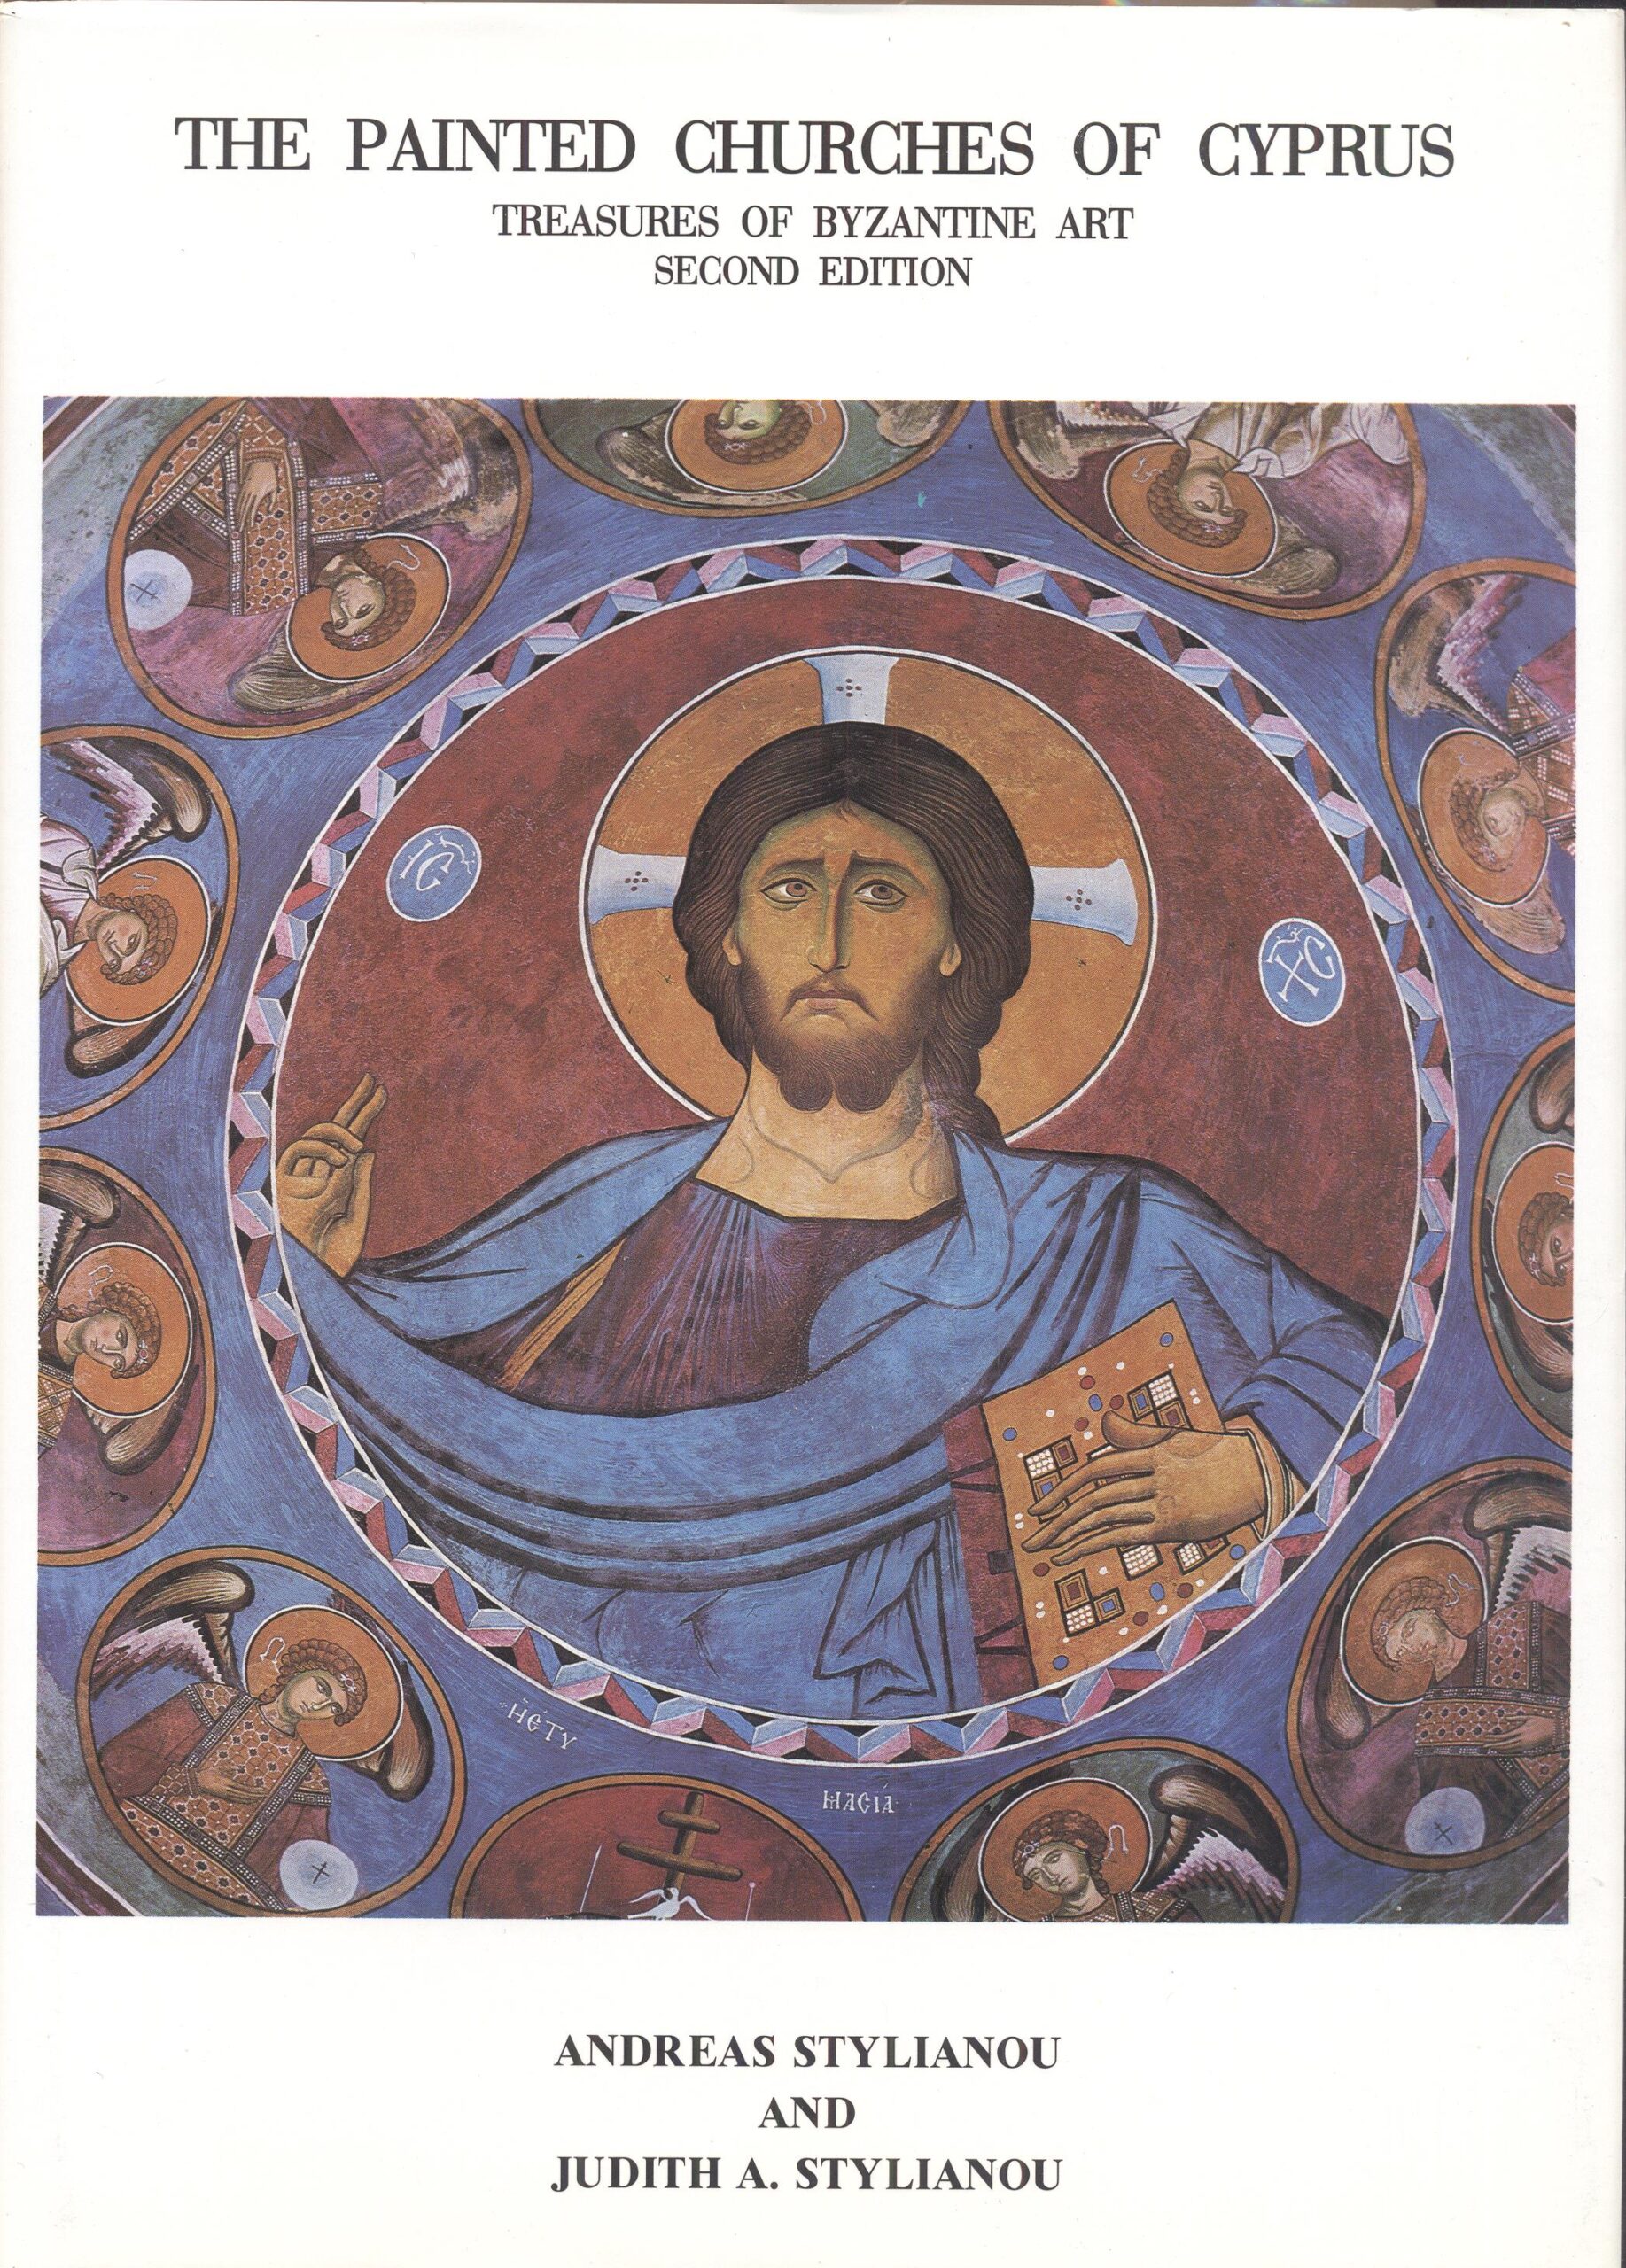 THE PAINTED CHURCHES OF CYPRUS, TREASURES OF BYZANTINE ART SECOND EDITION